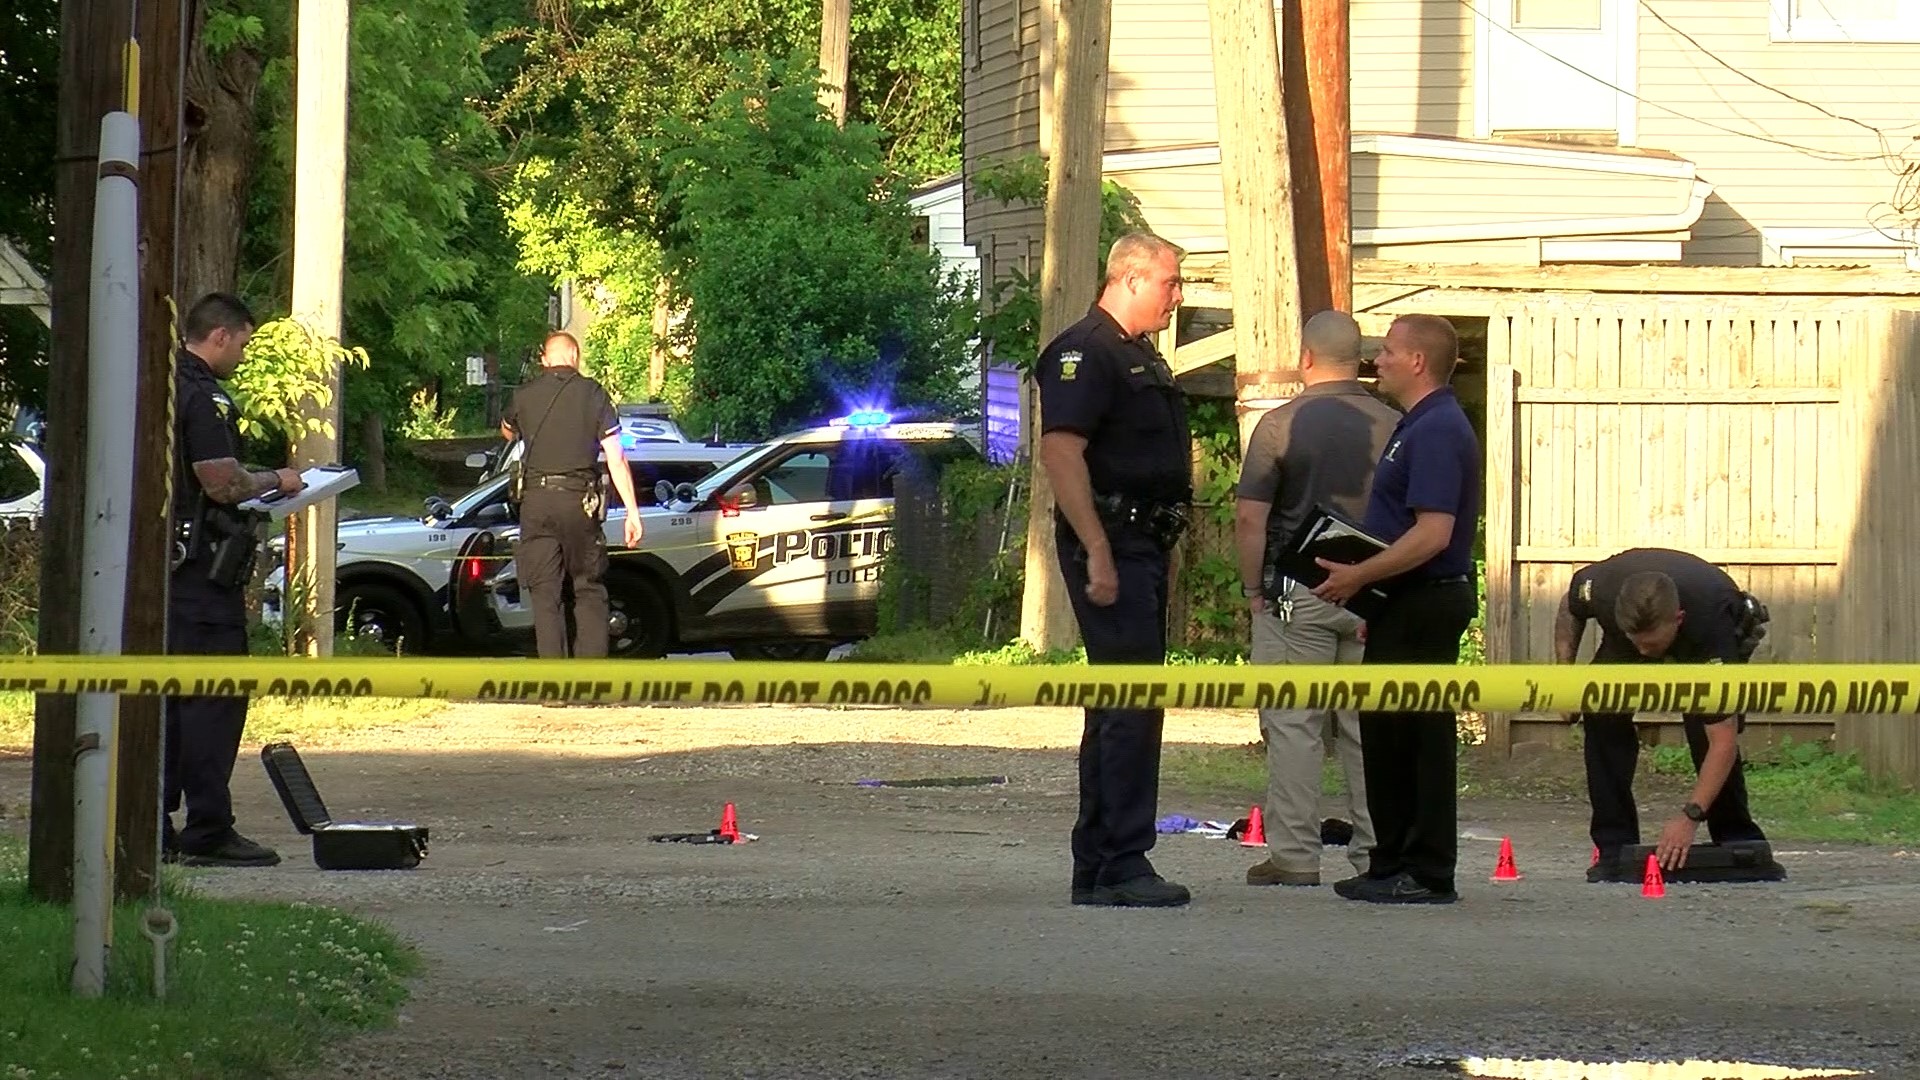 The boy died at the hospital after being shot in an alley behind houses on Vermaas Avenue, police say. No suspects are in custody.